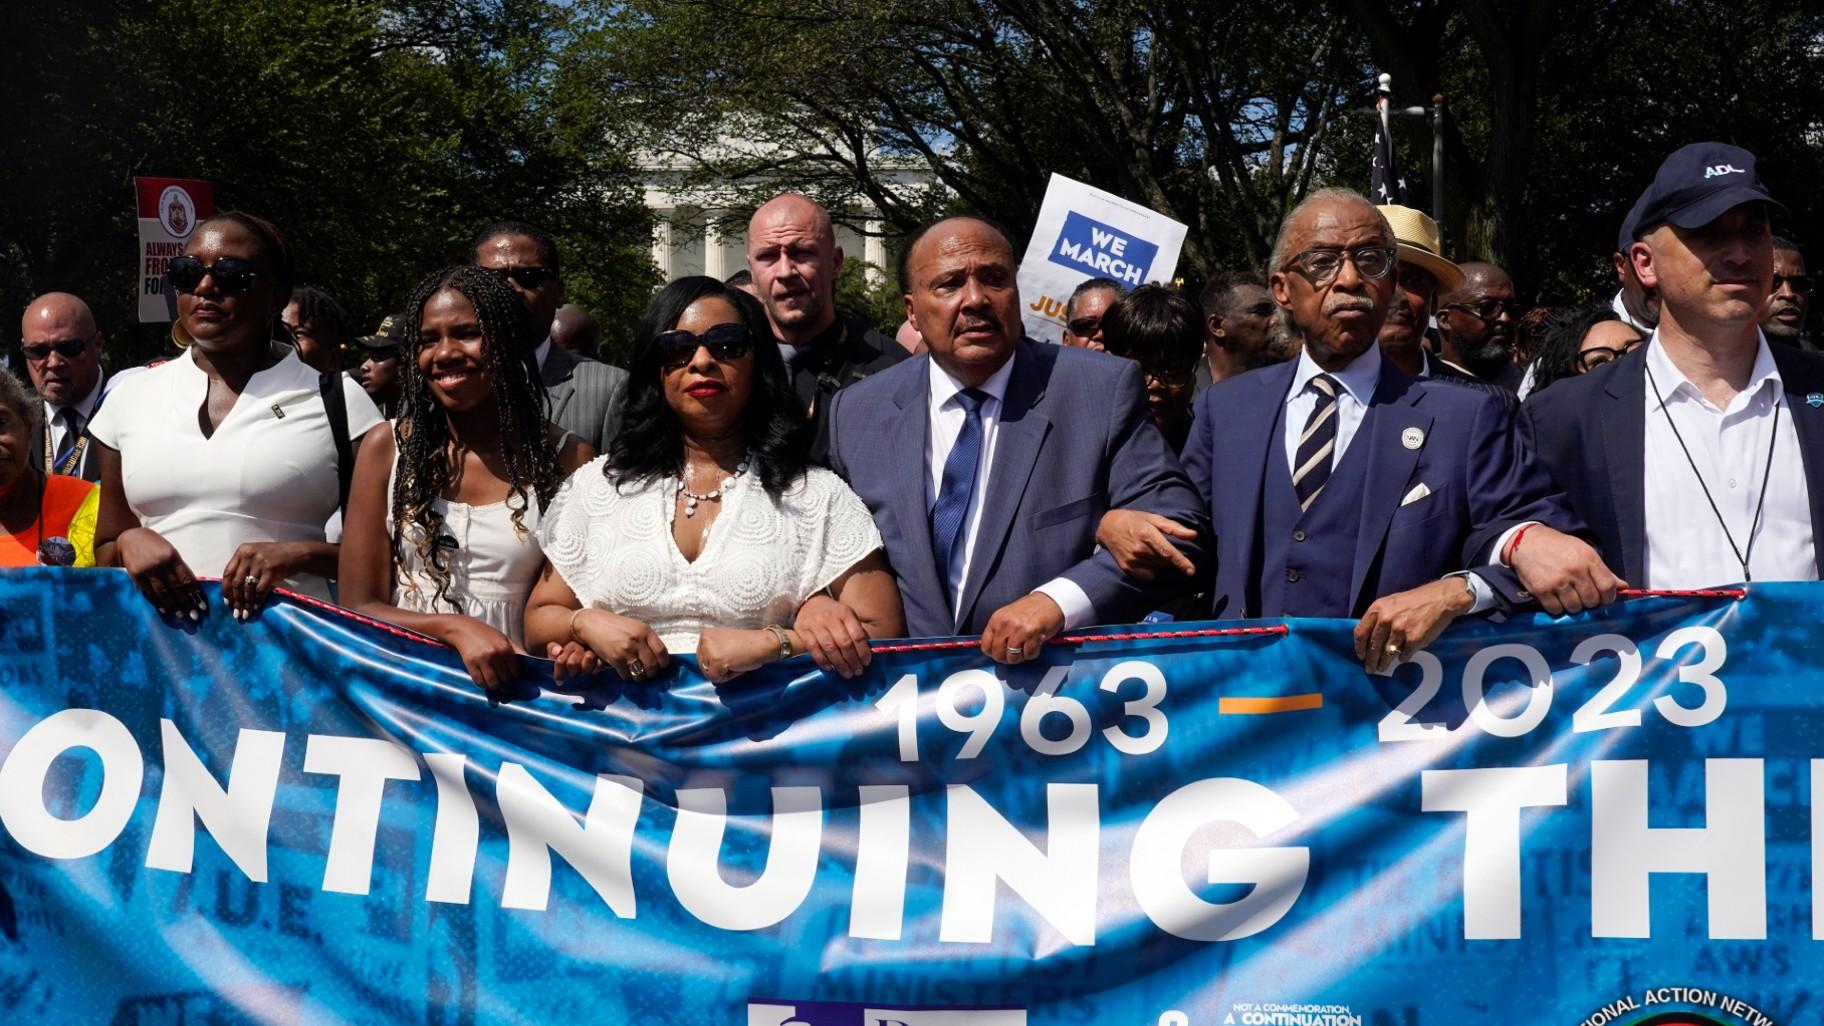 The Rev. Al Sharpton, second from right, joins Martin Luther King III, the son of Martin Luther King Jr., third from left, his wife Arndrea Waters King and their daughter Yolanda King as they march to honor the 60th Anniversary of the March on Washington, Saturday, Aug. 26, 2023, in Washington. (AP Photo / Jacquelyn Martin)